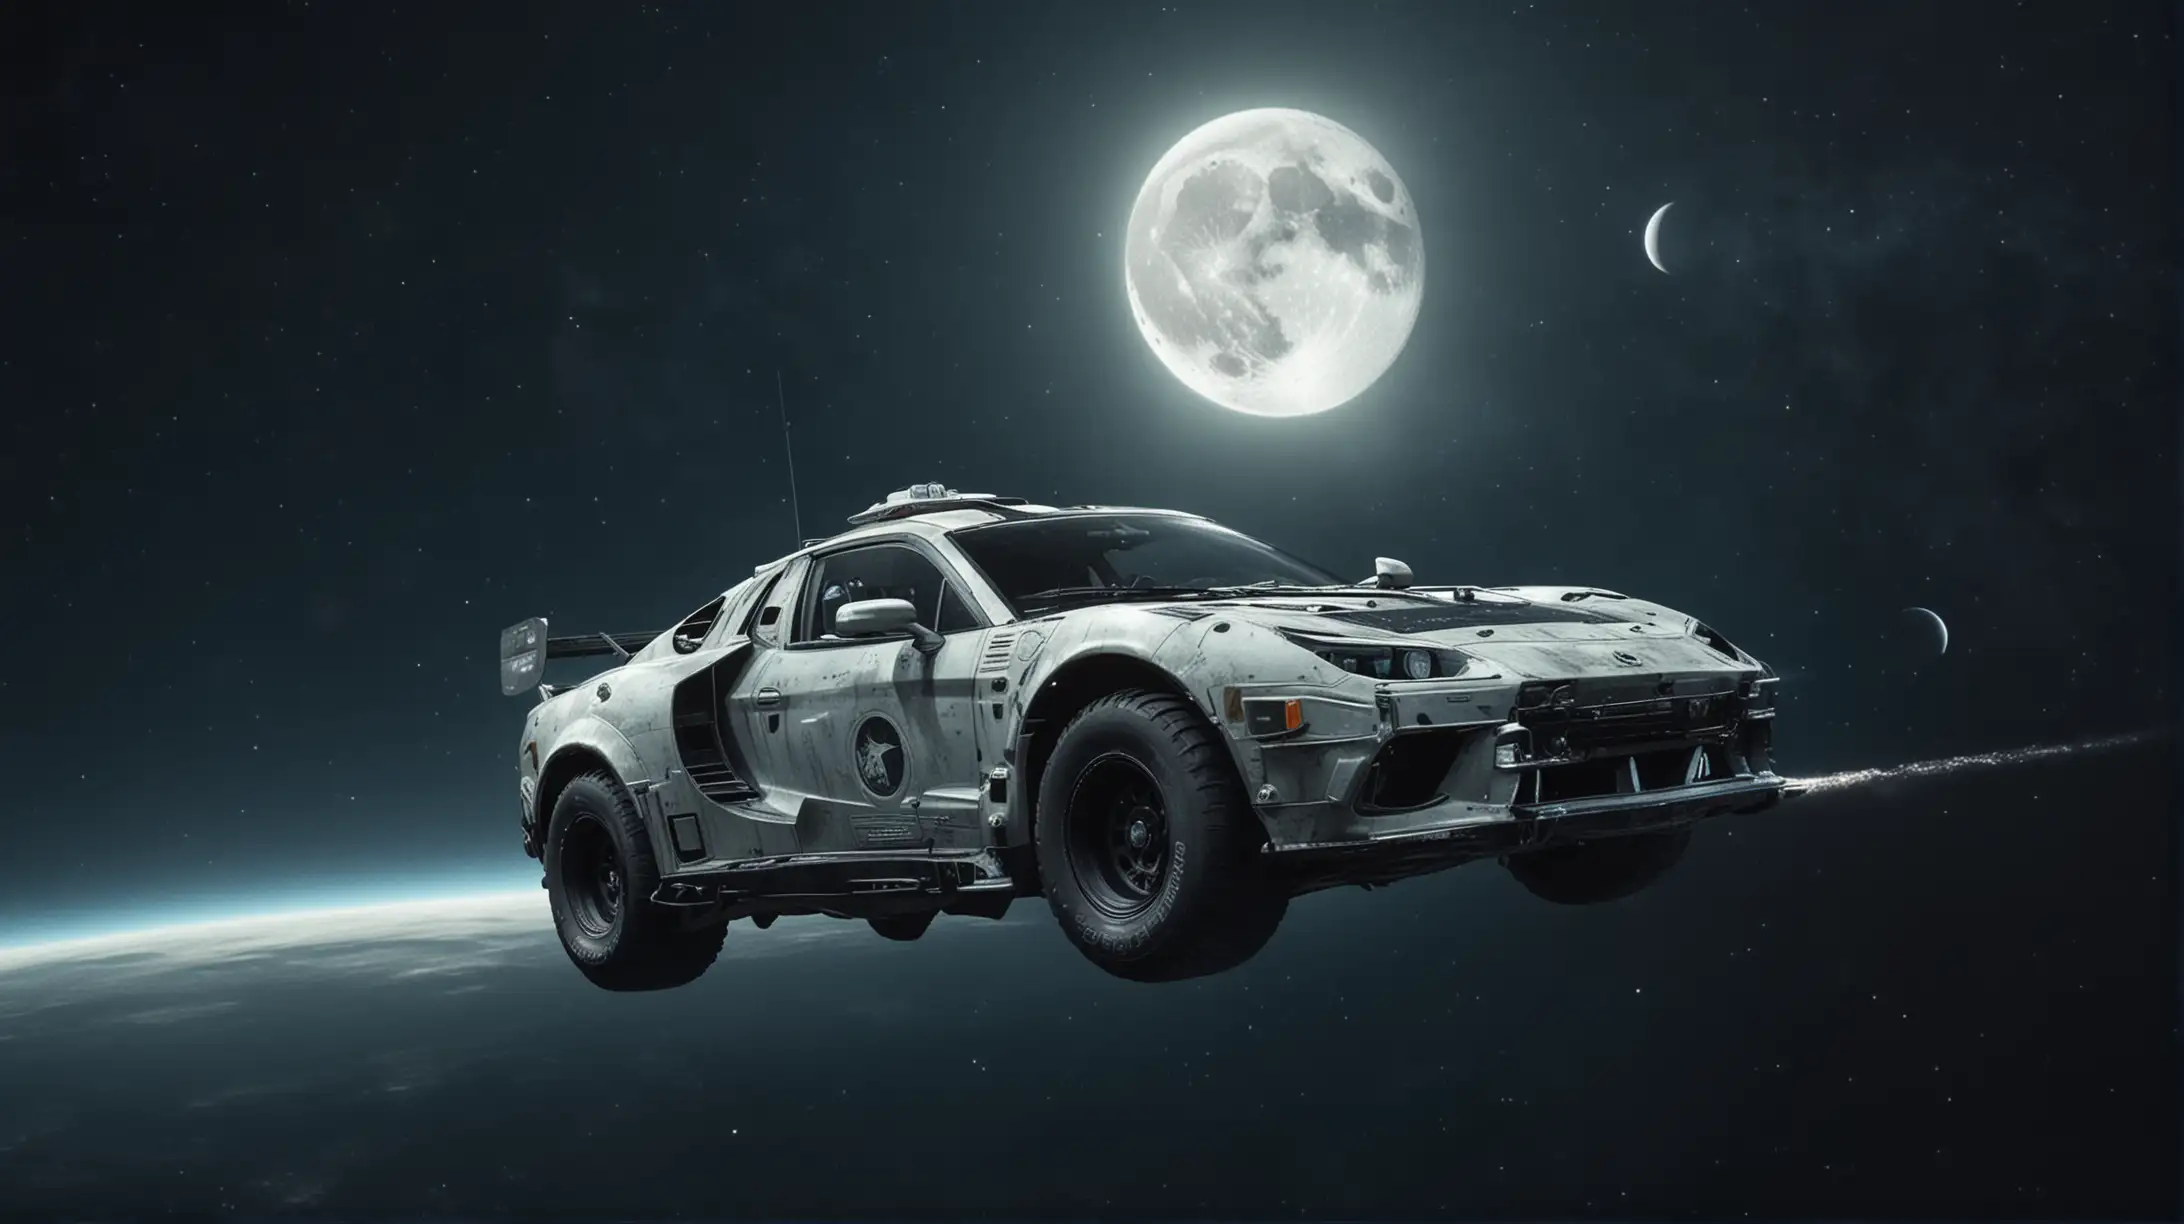 Car in space, moon in the background floating in space with driver
